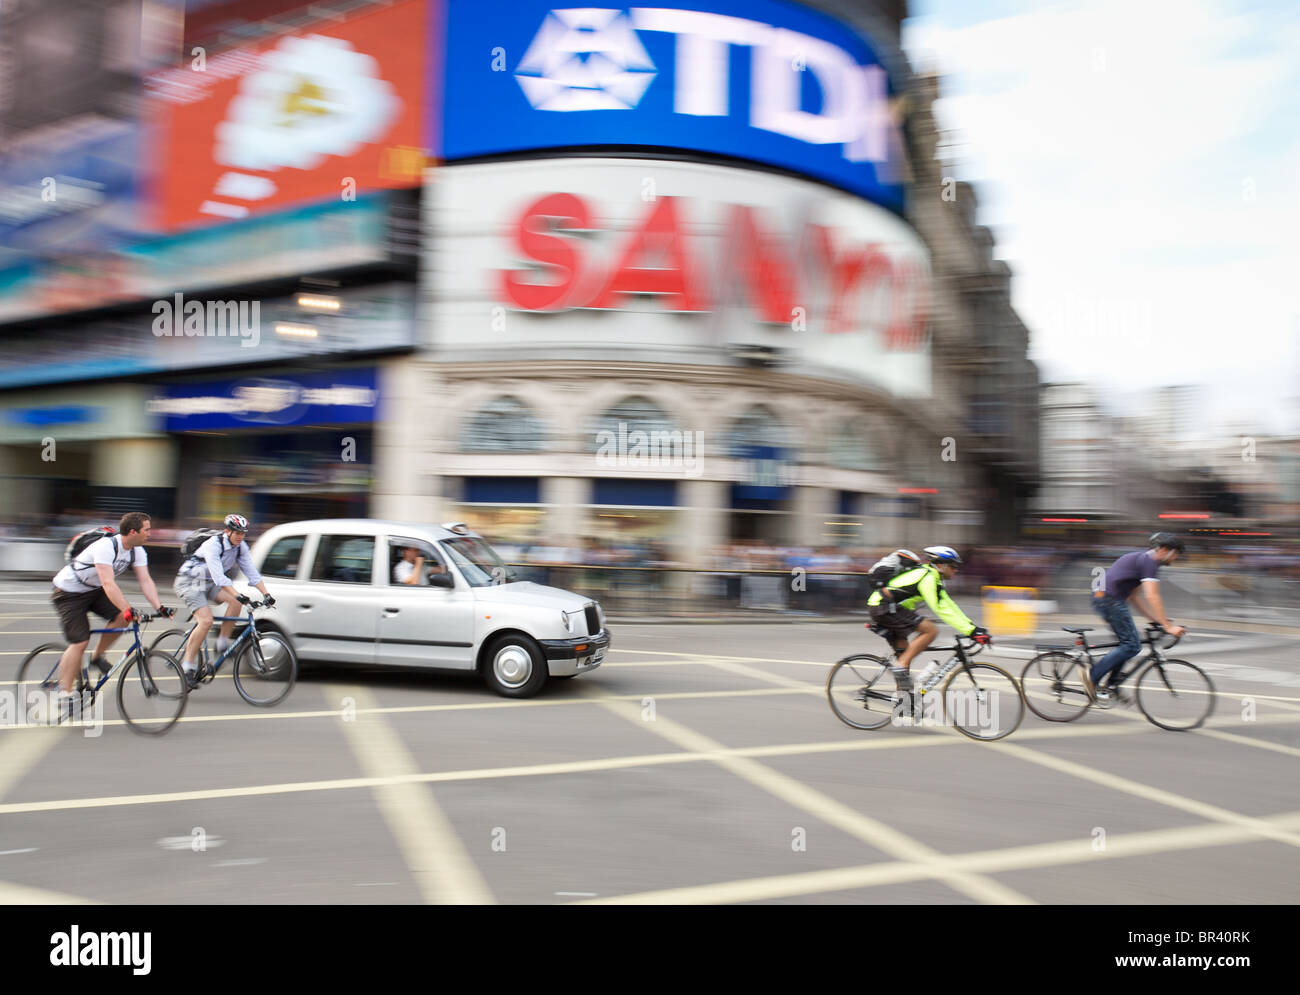 cyclists-in-piccadilly-circus-london-BR4